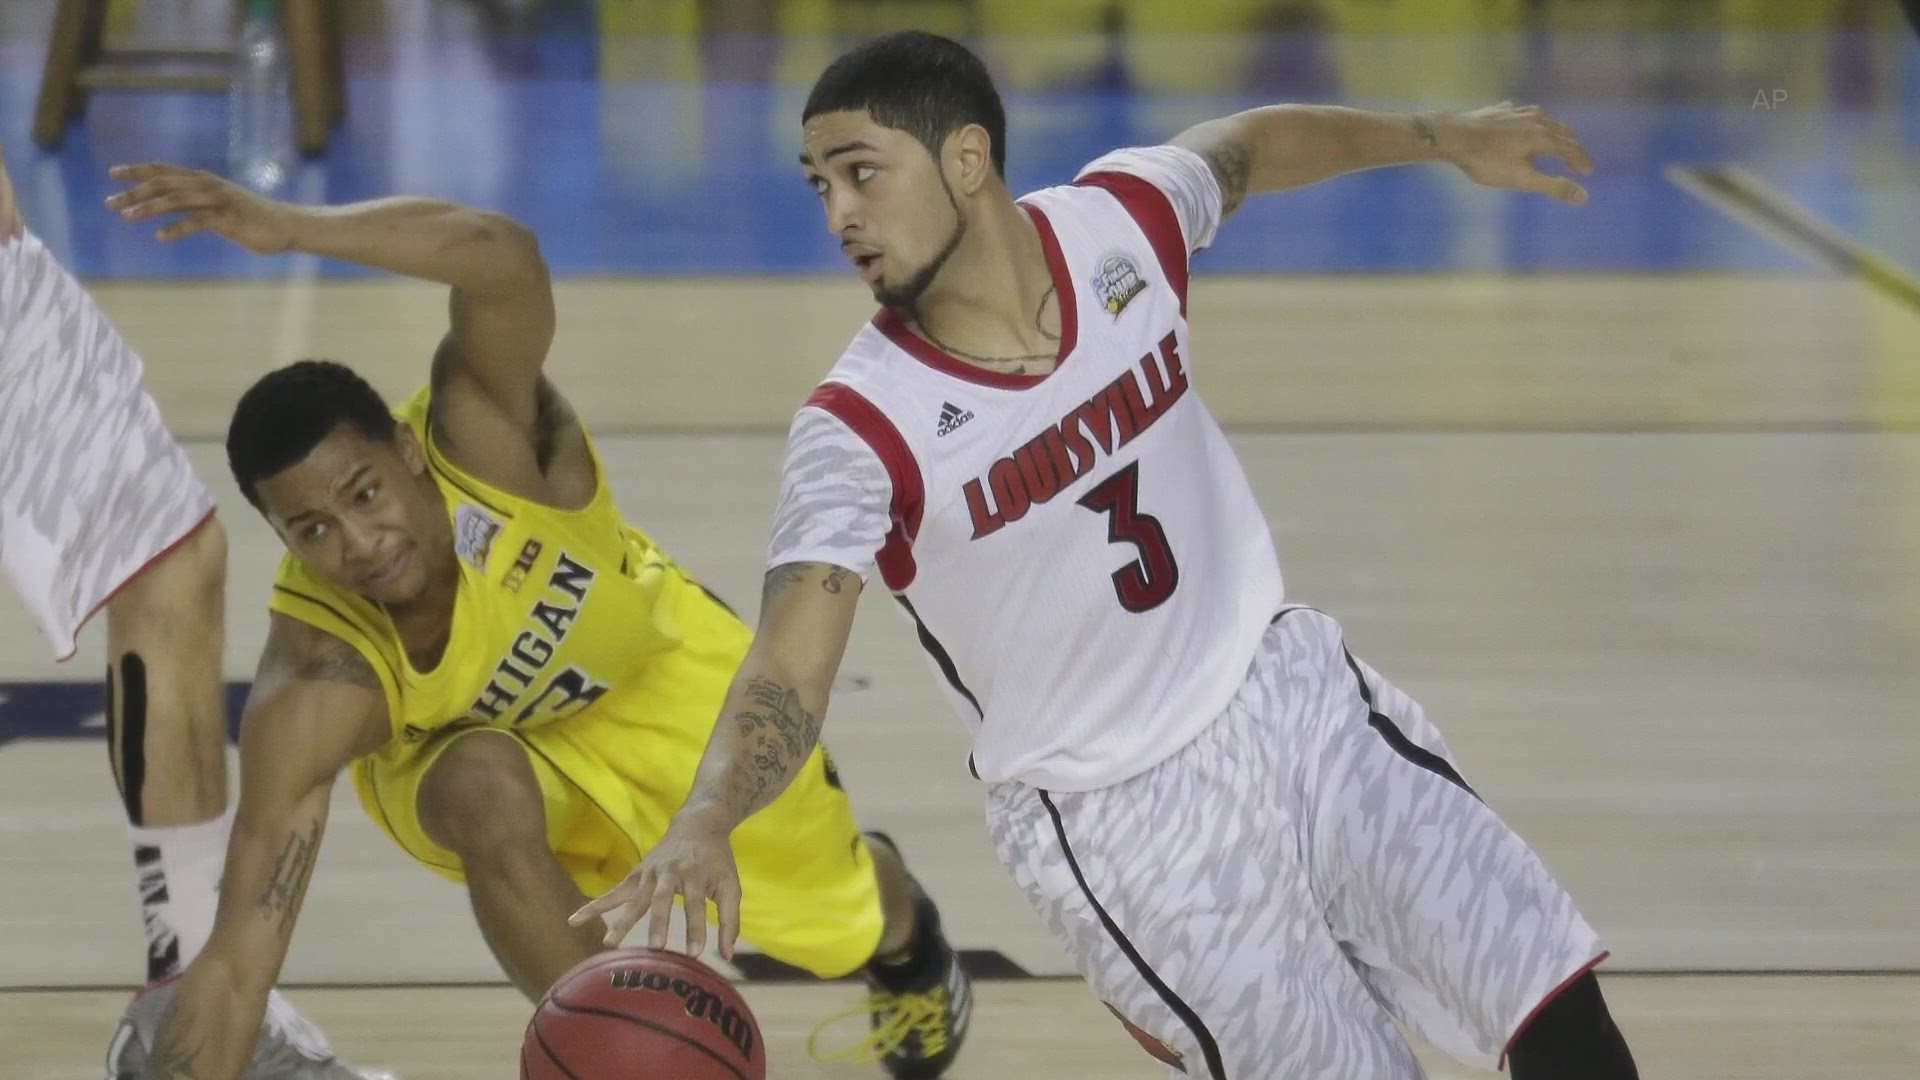 Athlete Peyton Siva is opening a sports complex in east Louisville.